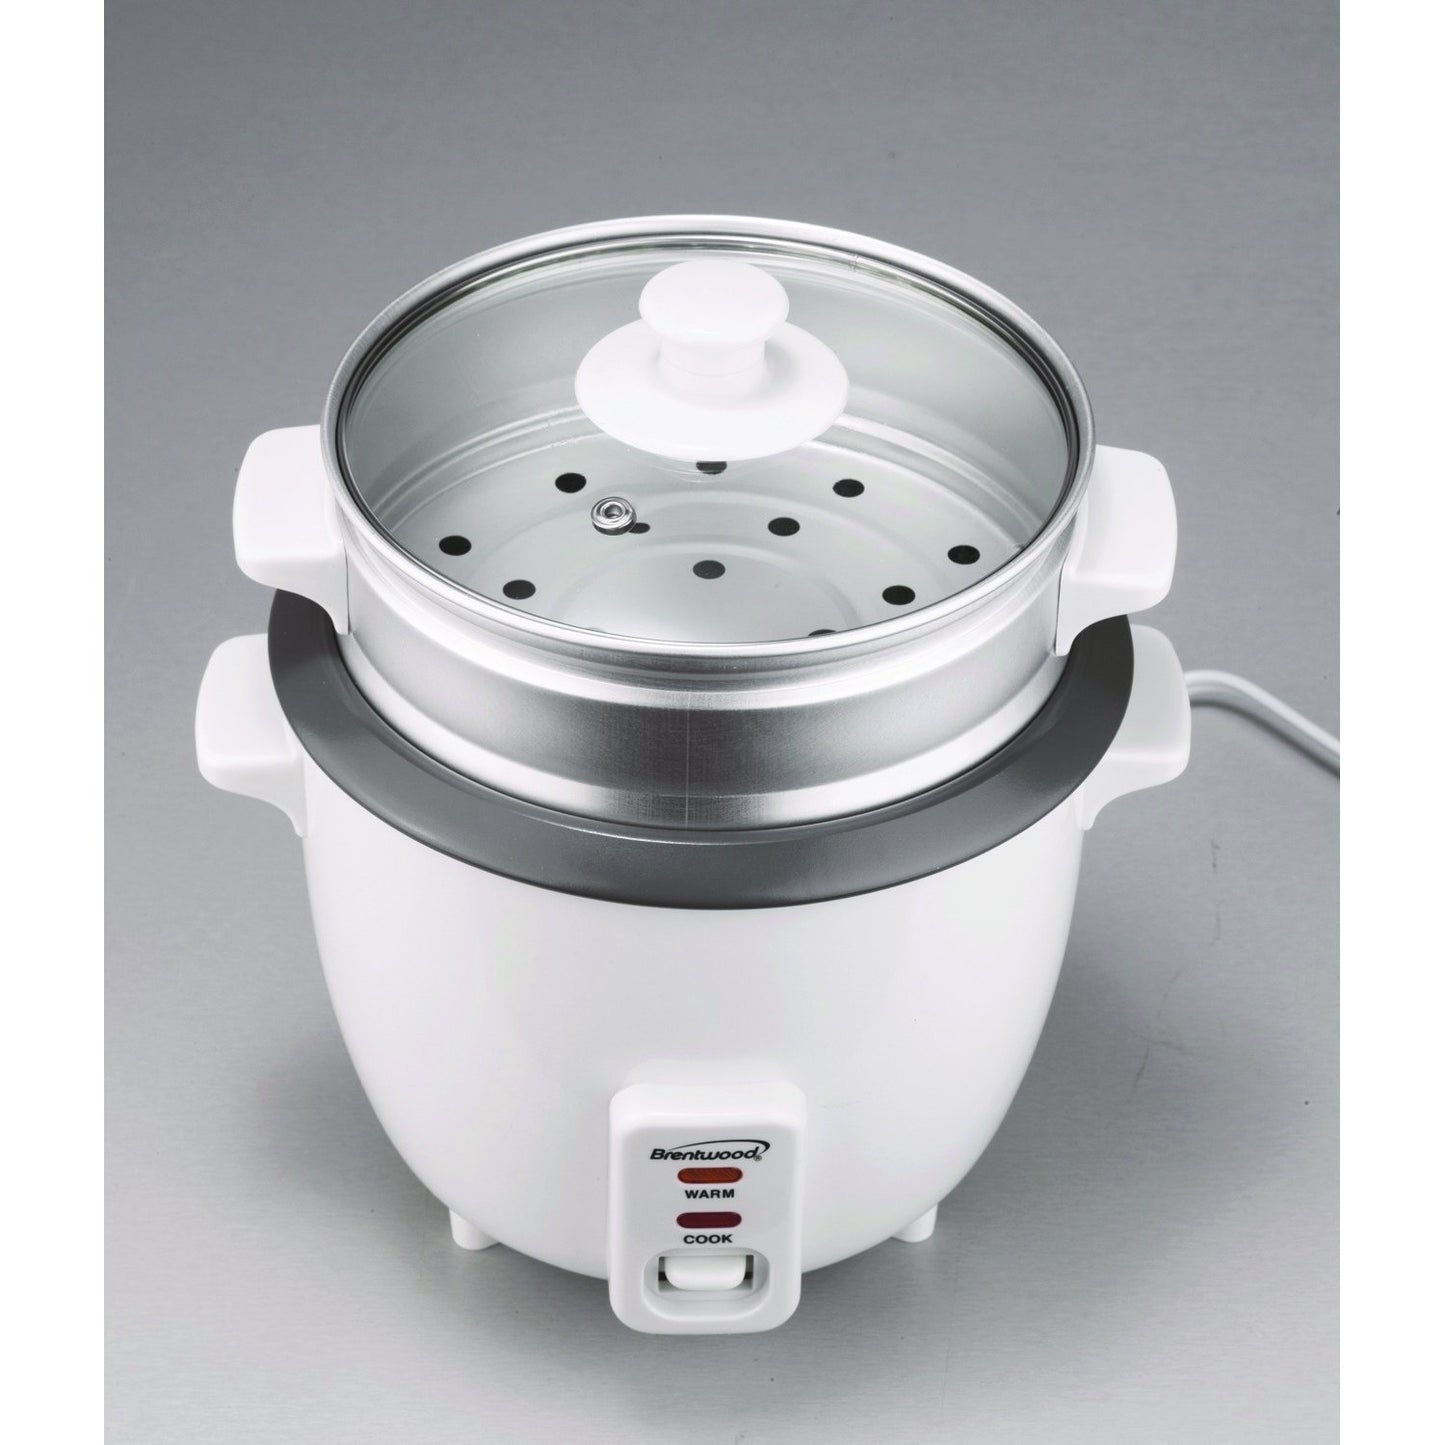 Brentwood Appl. TS-380S Rice Cooker w/Steamer (10 Cups, 700W)